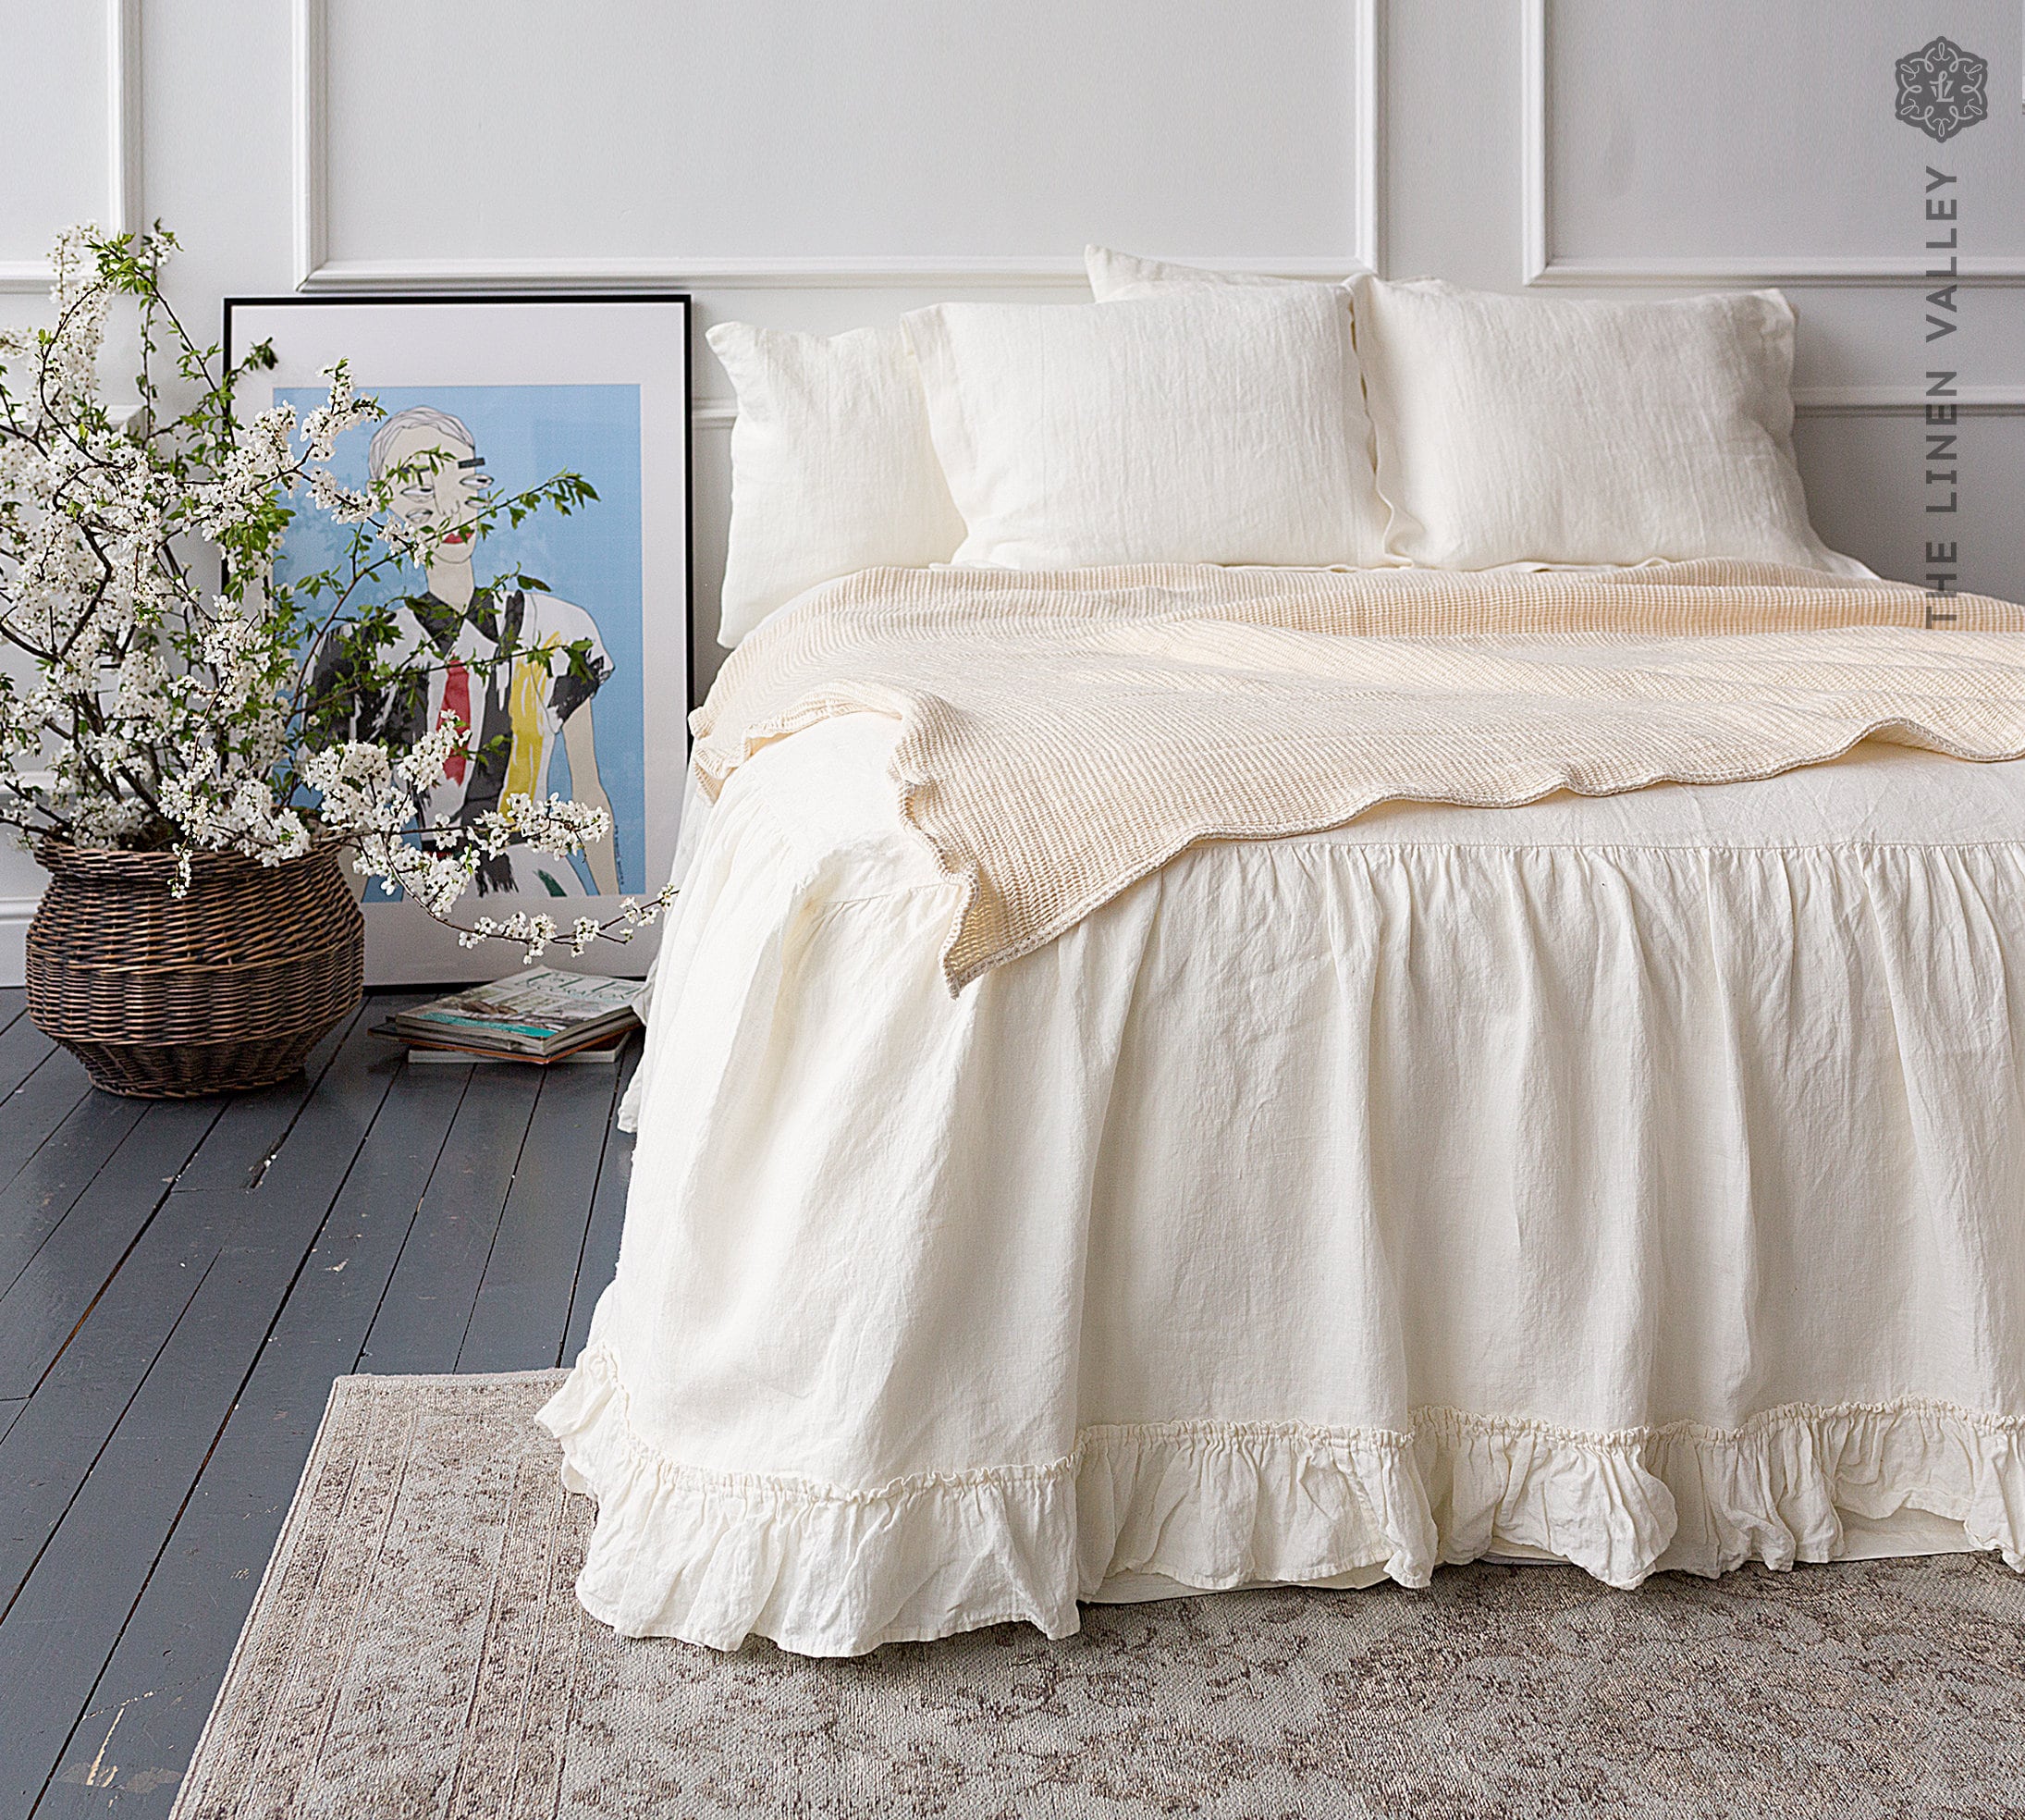 Us King Size Optical White Linen Bed, White Dust Ruffle For King Size Bed